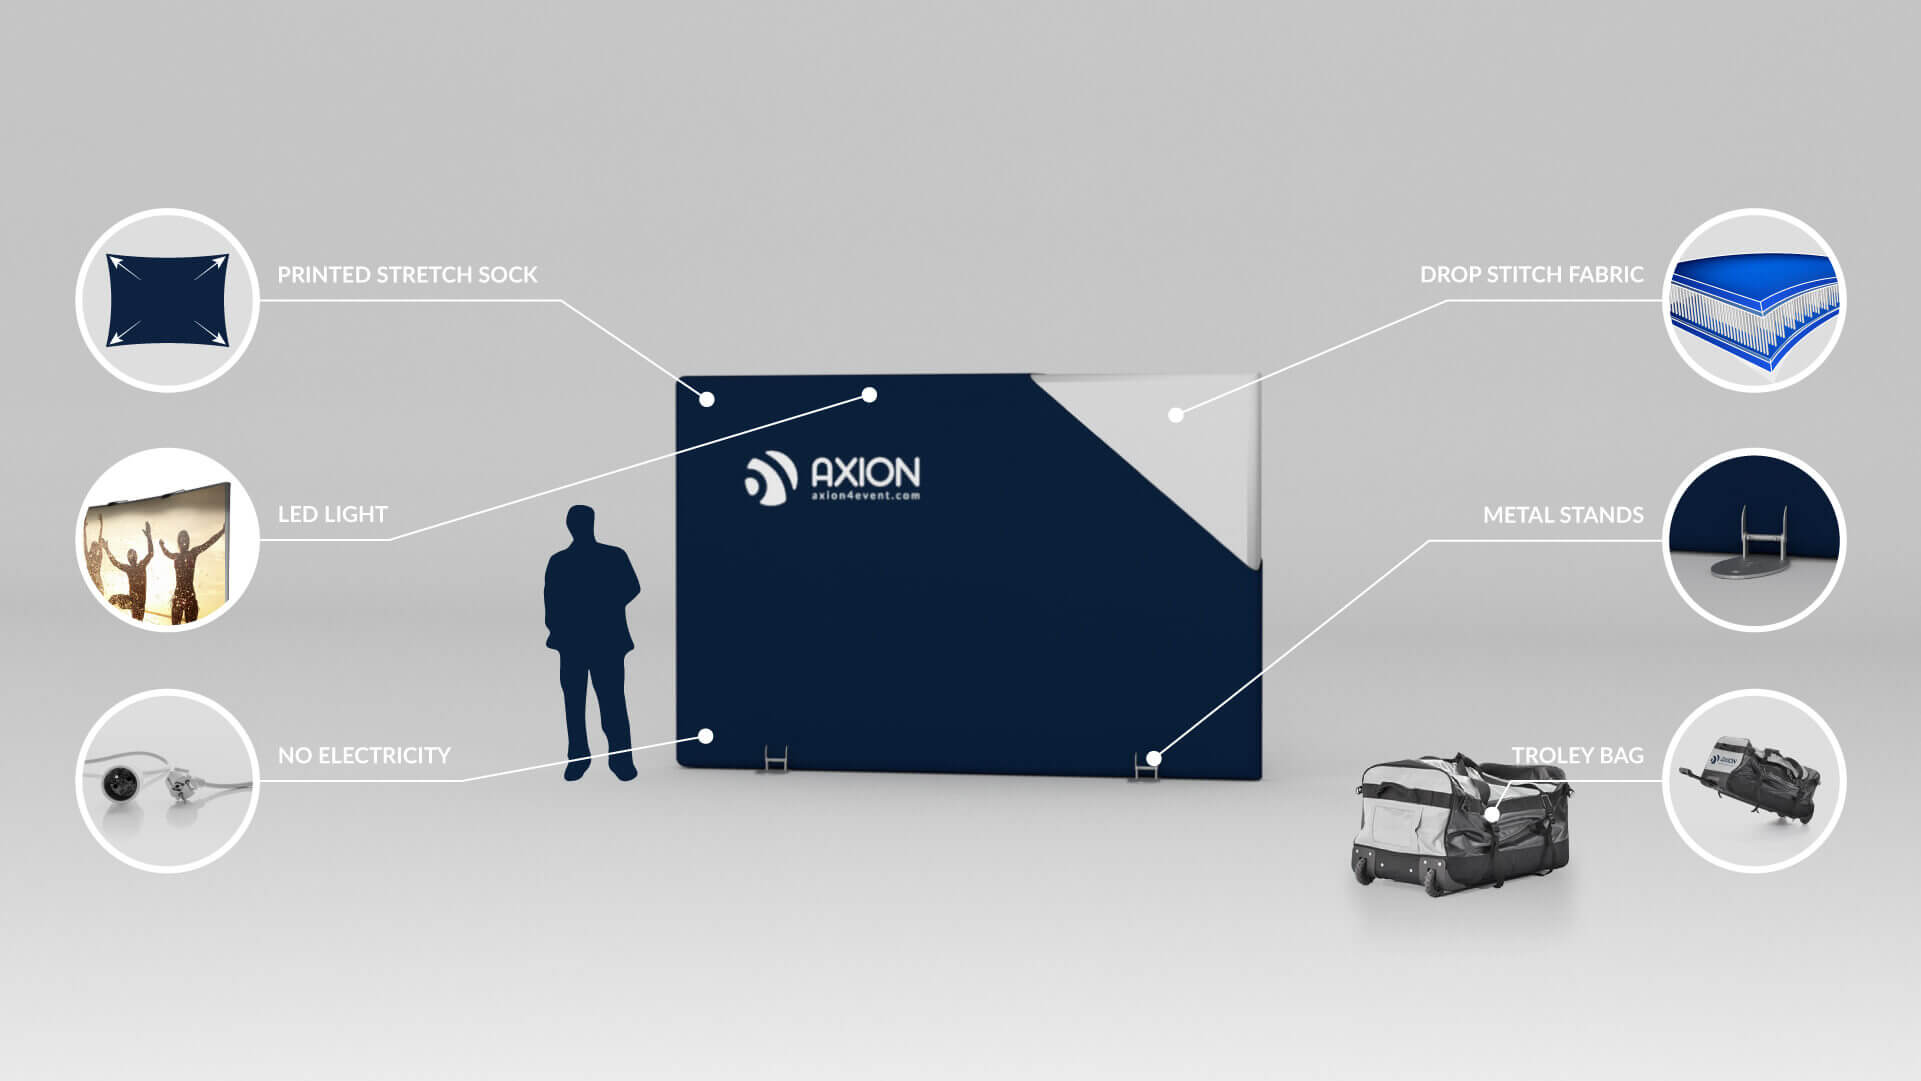 axion-square-tent_main-feature